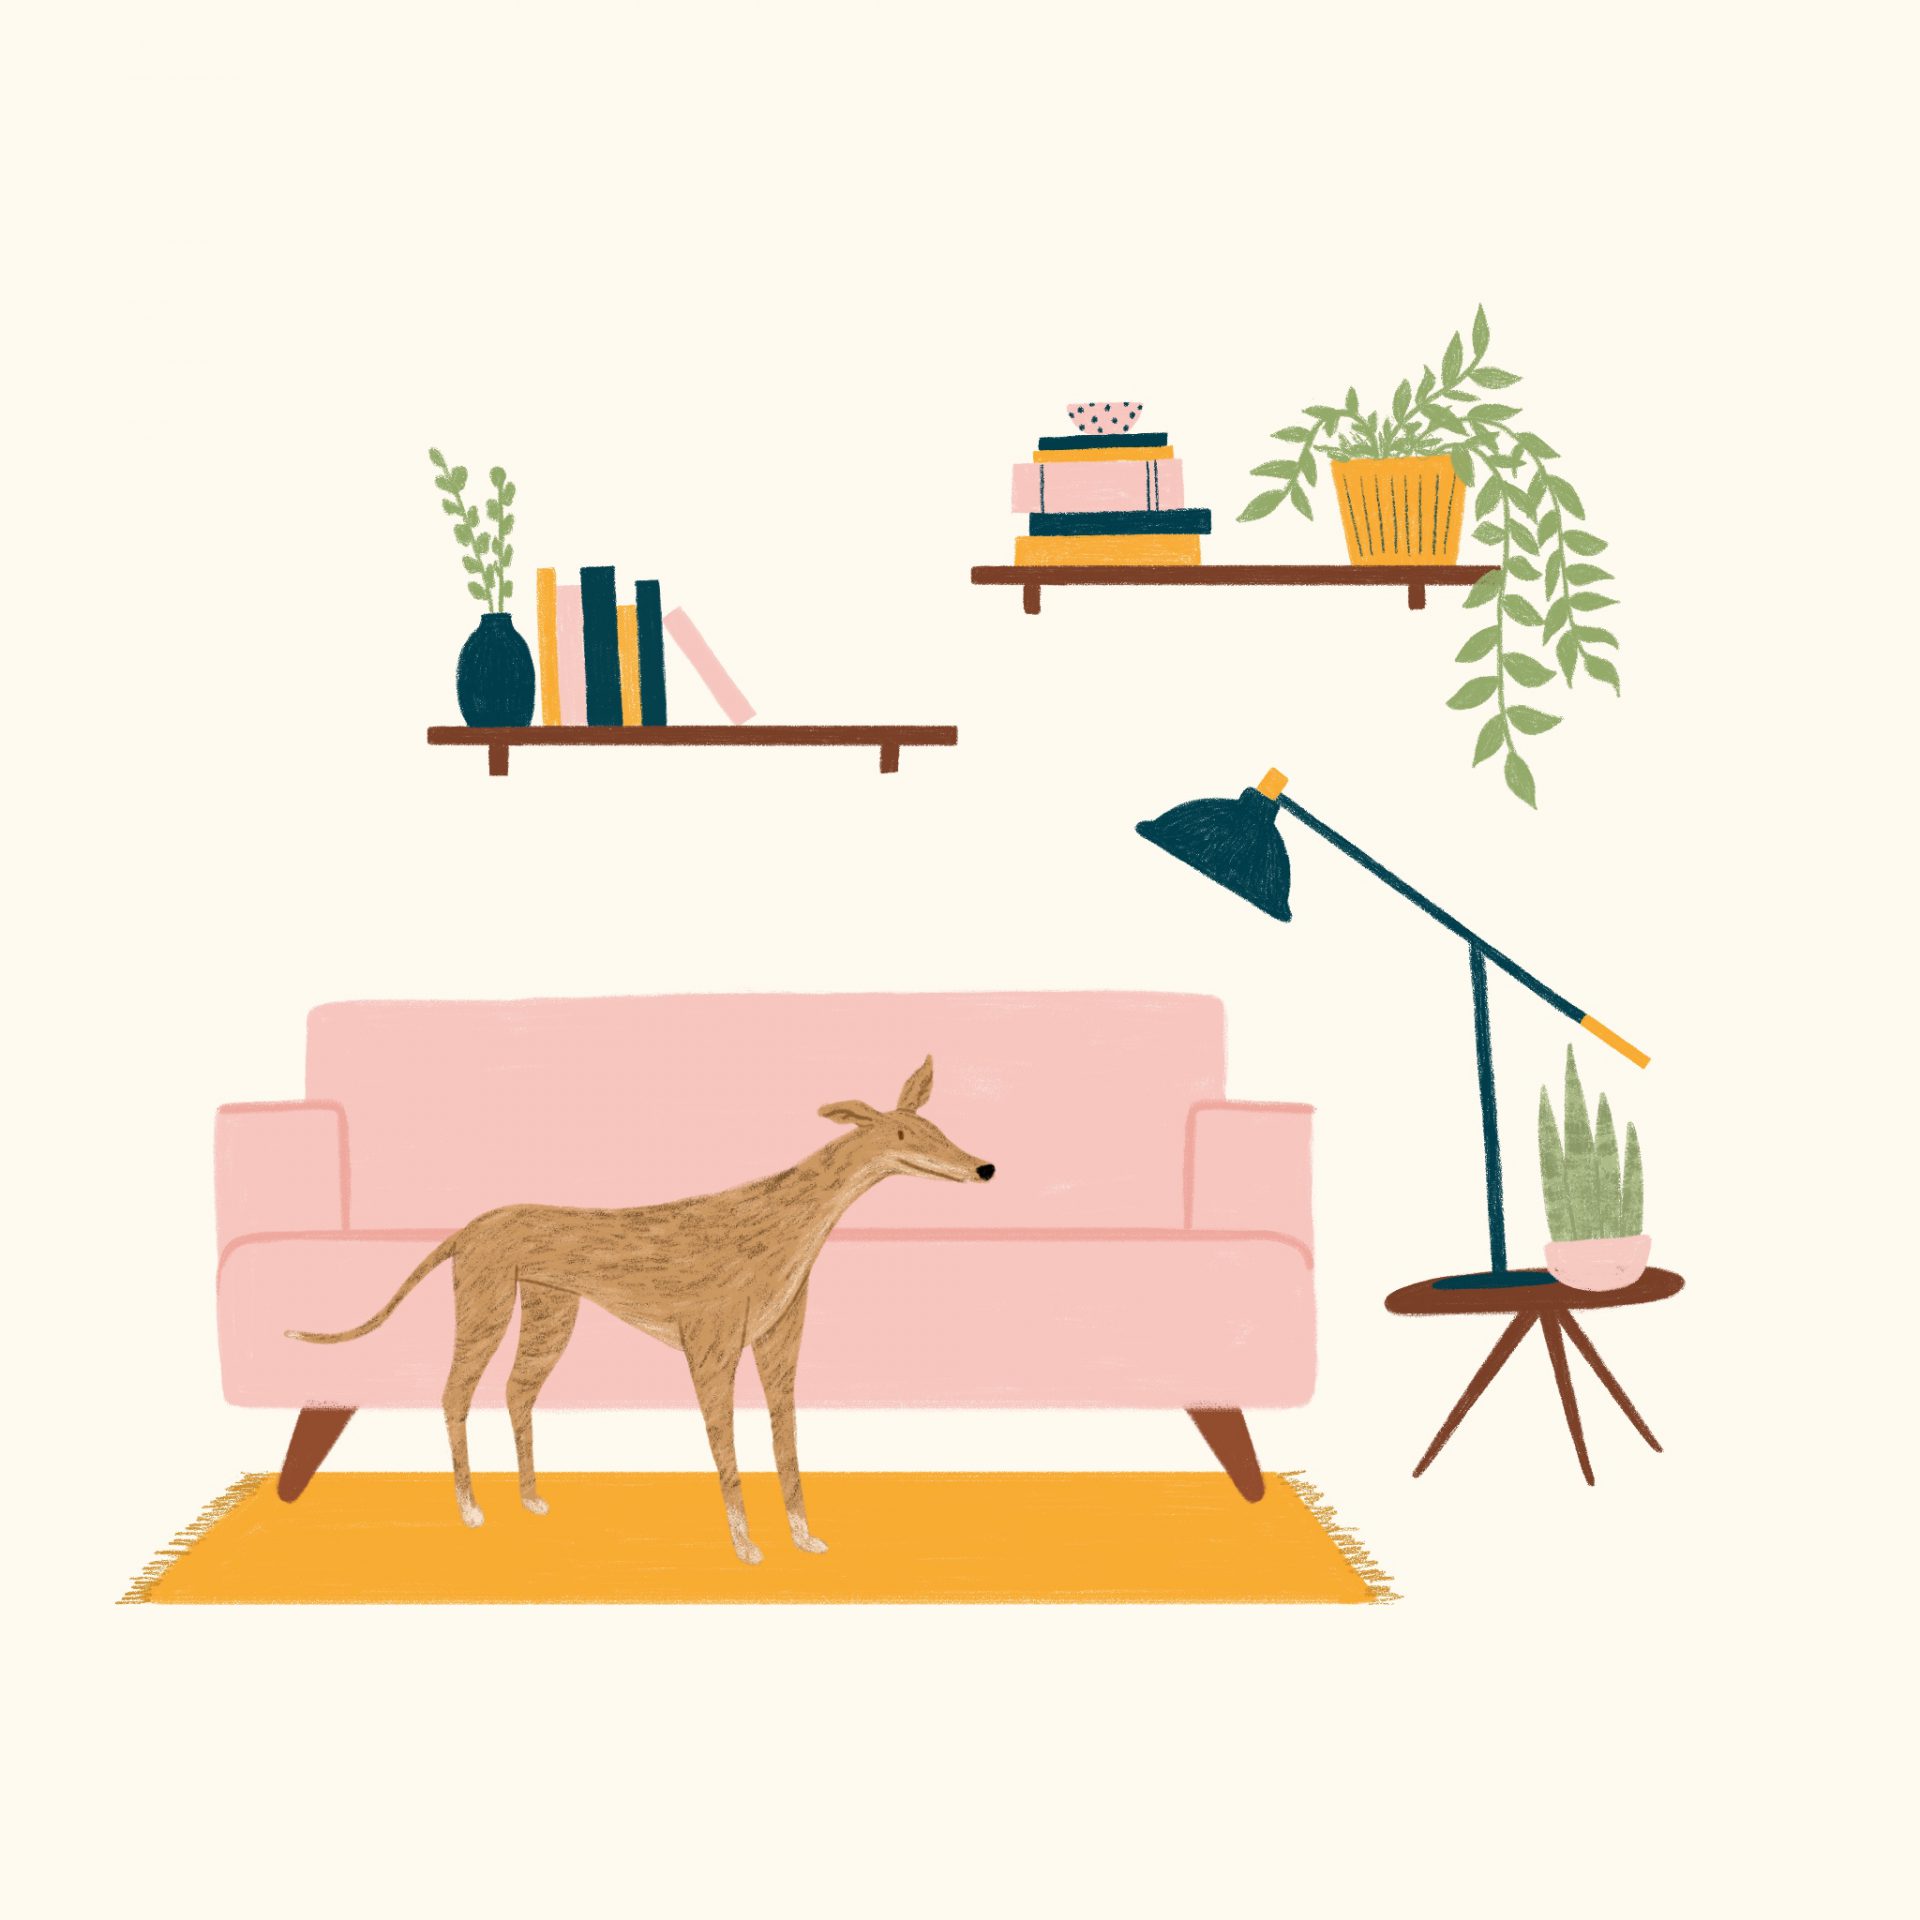 Illustration of a brindle greyhound in a living room with a pink couch